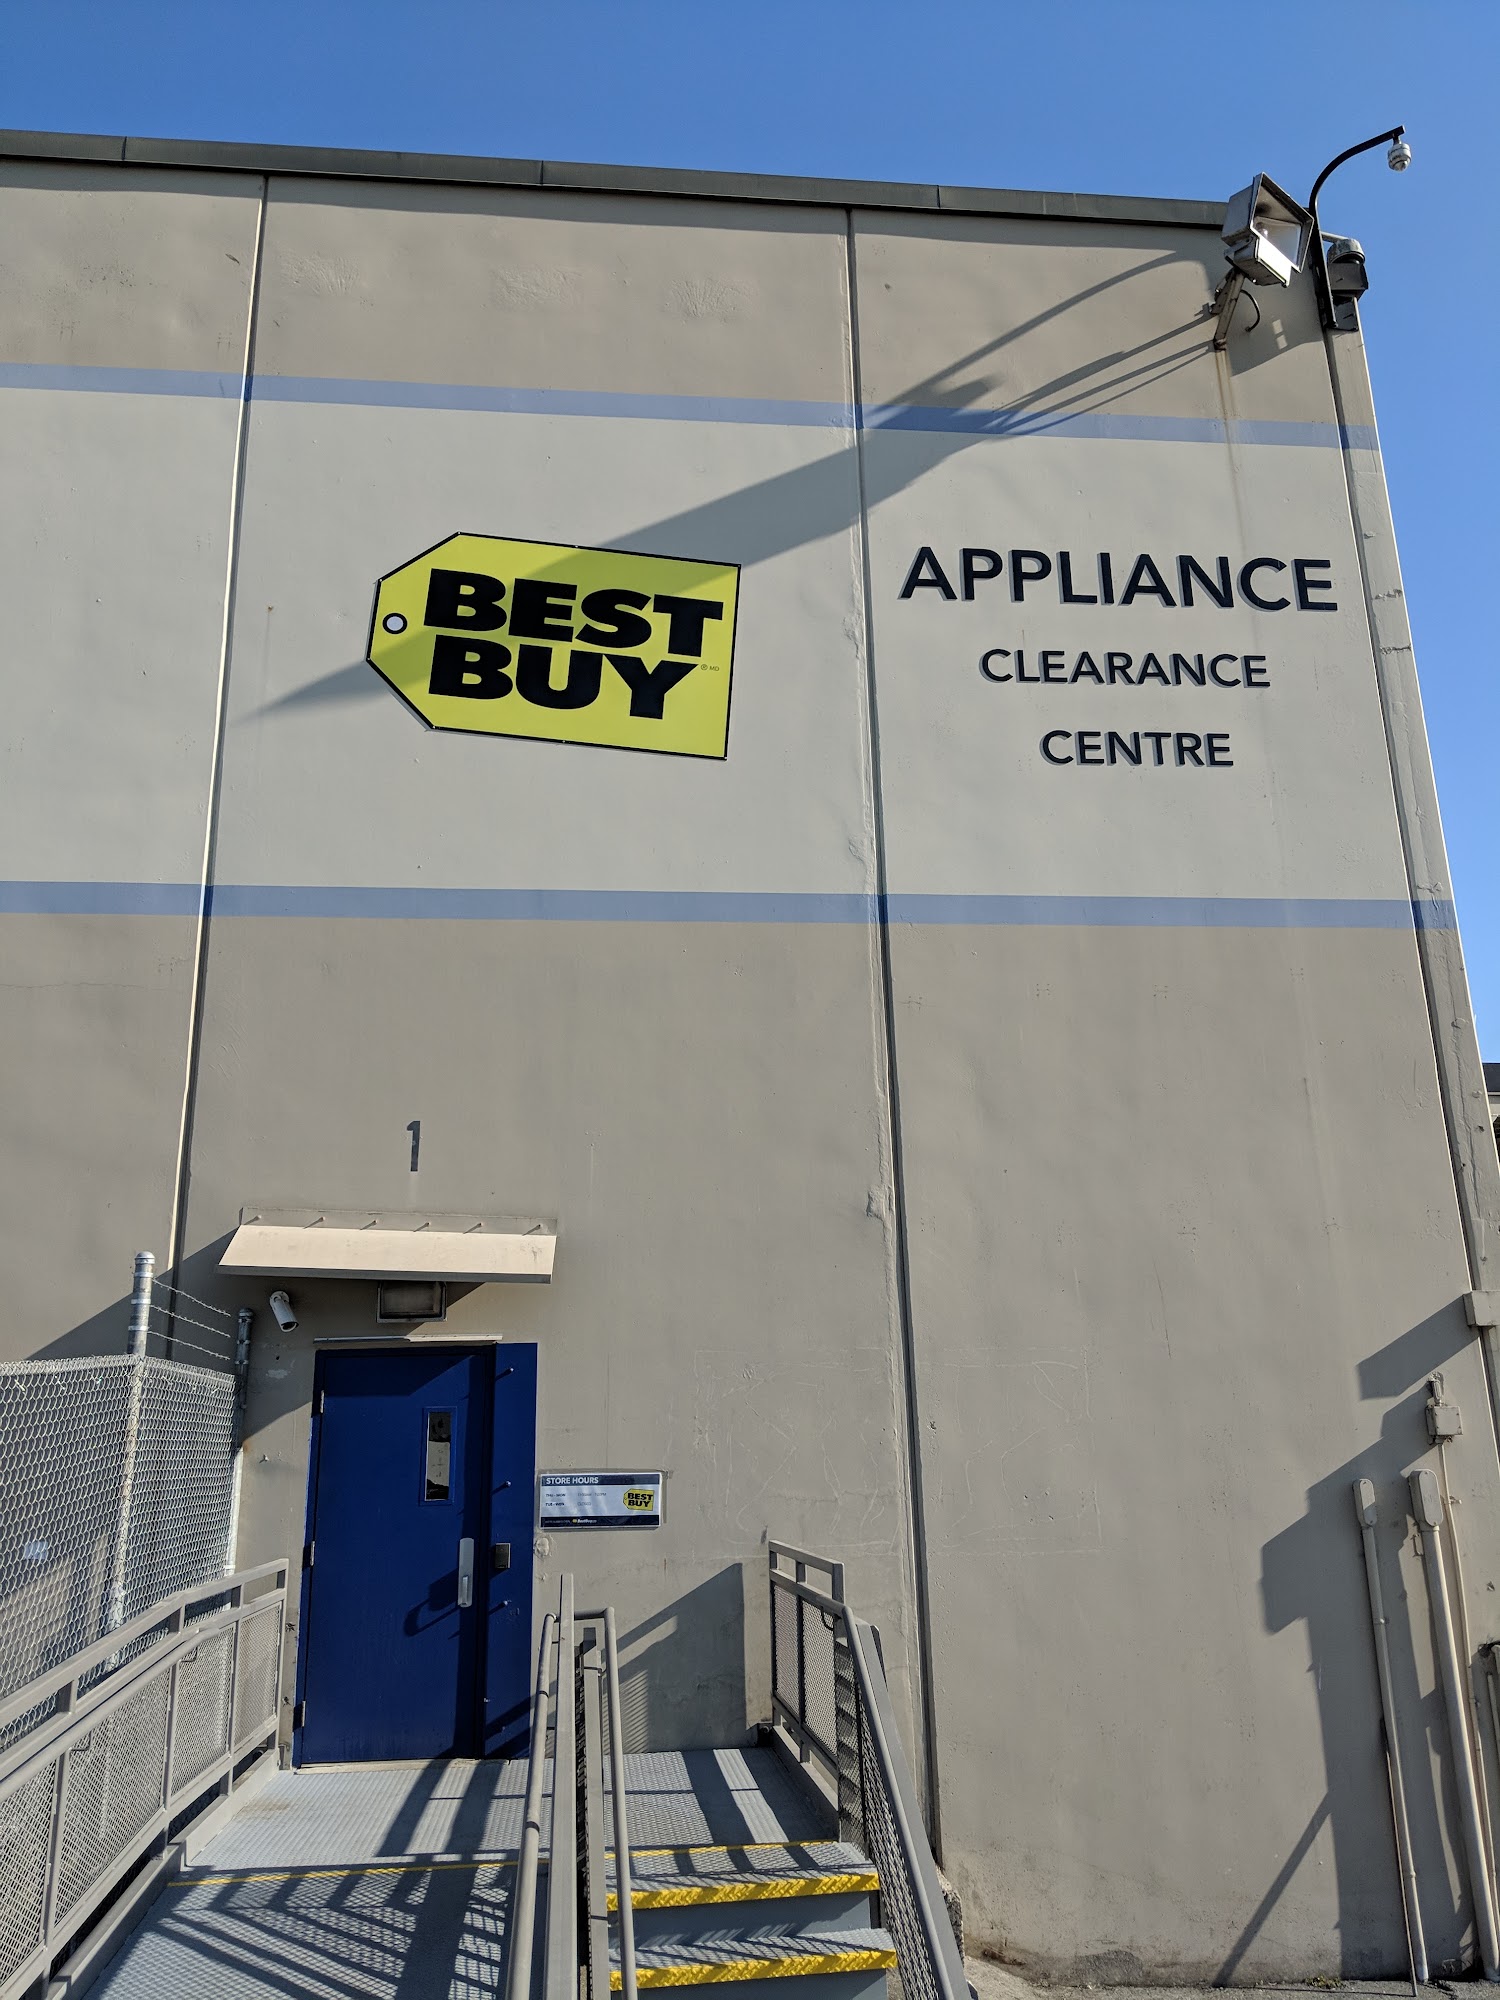 Best Buy Appliance Clearance Centre